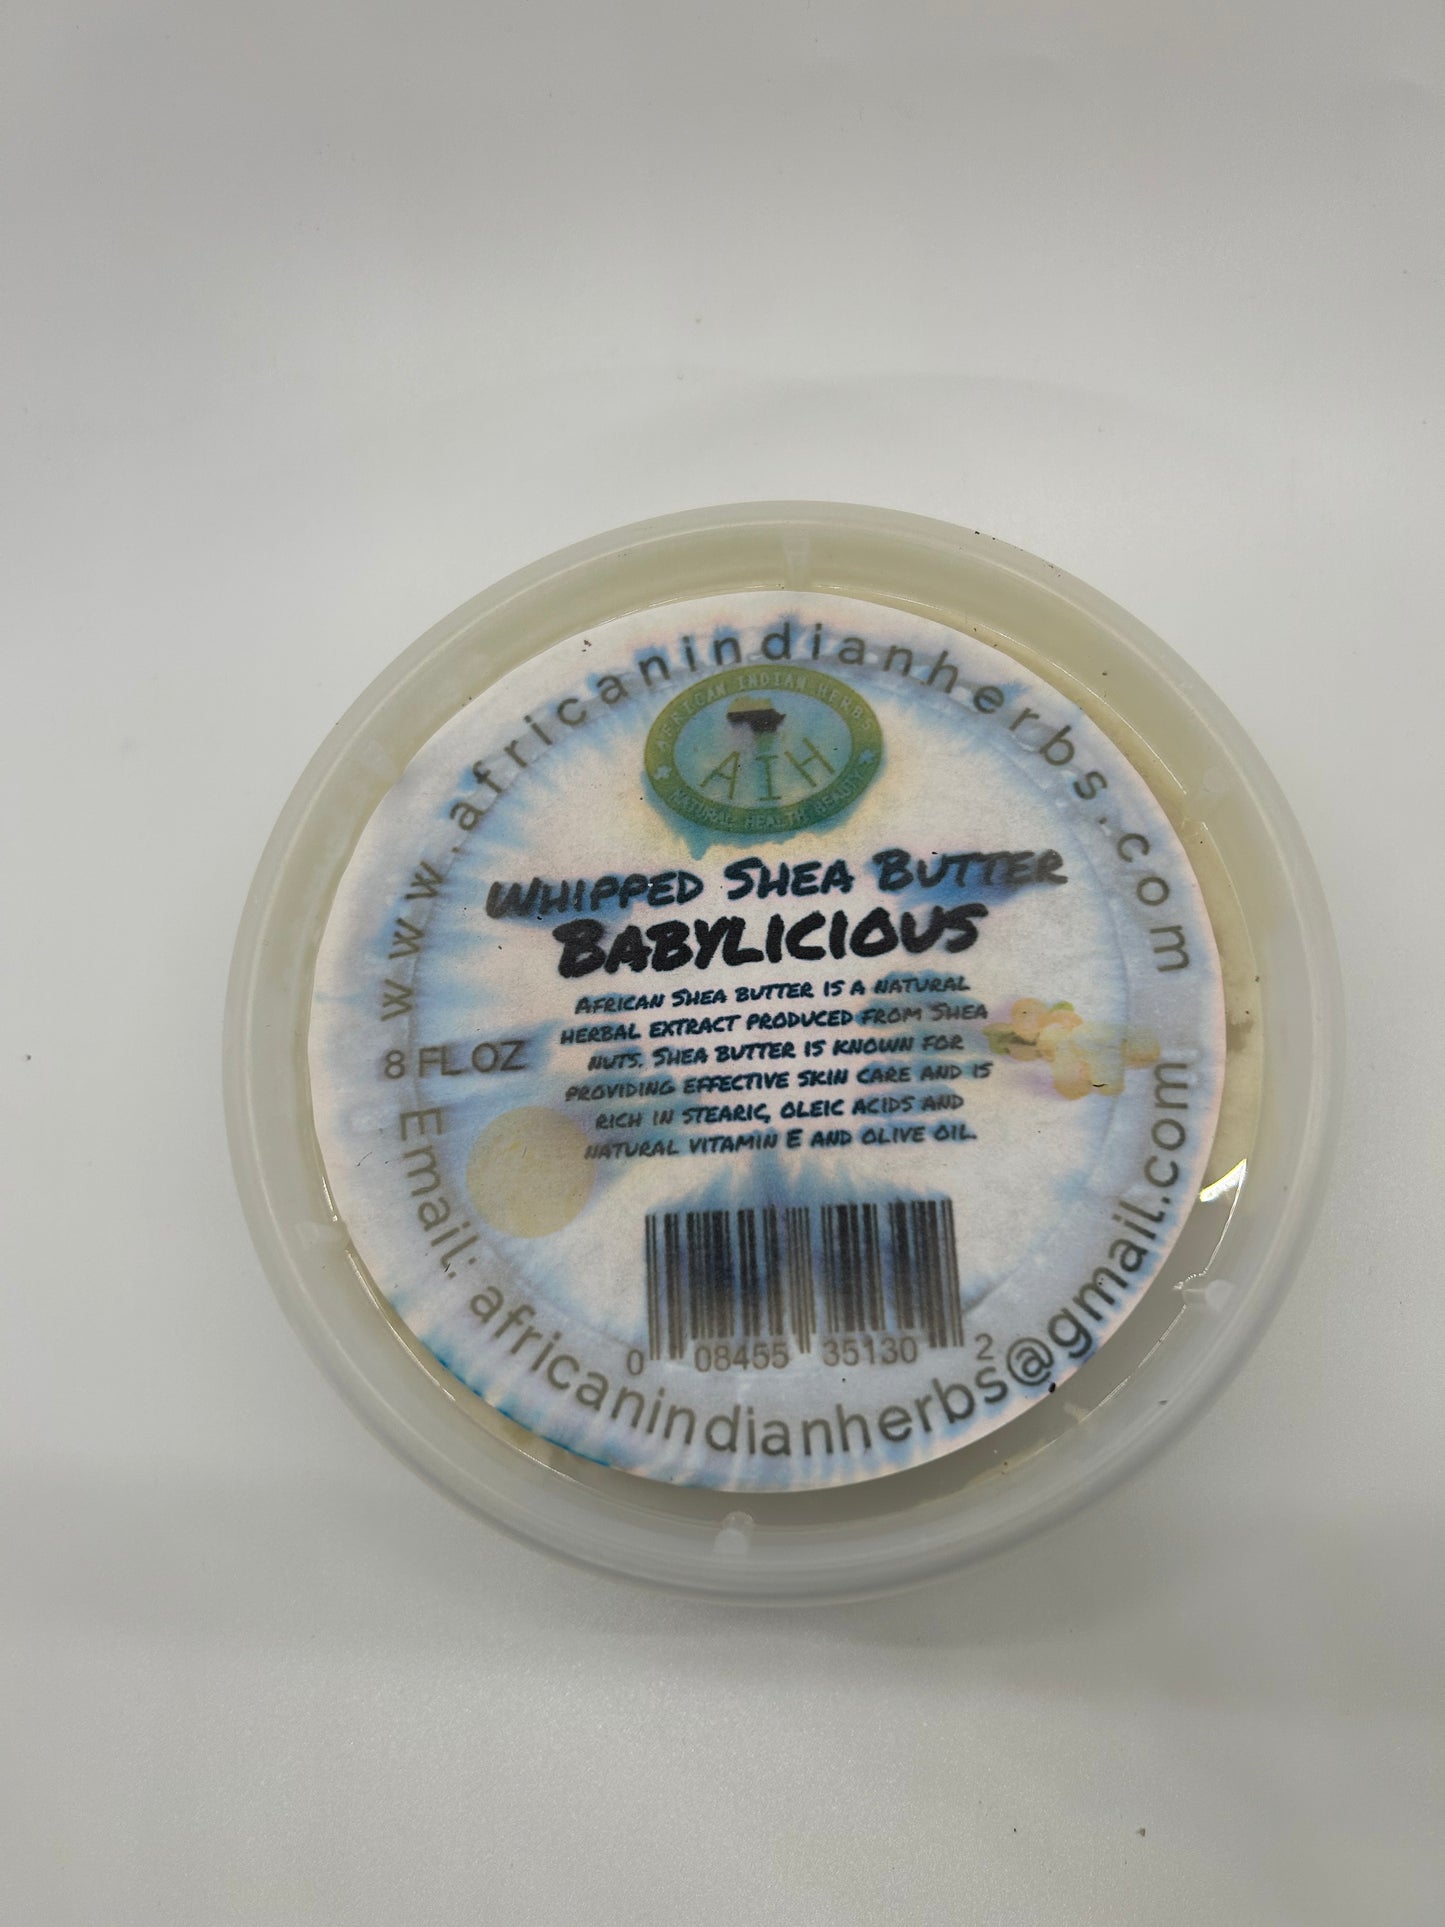 Babylicious whipped shea butter